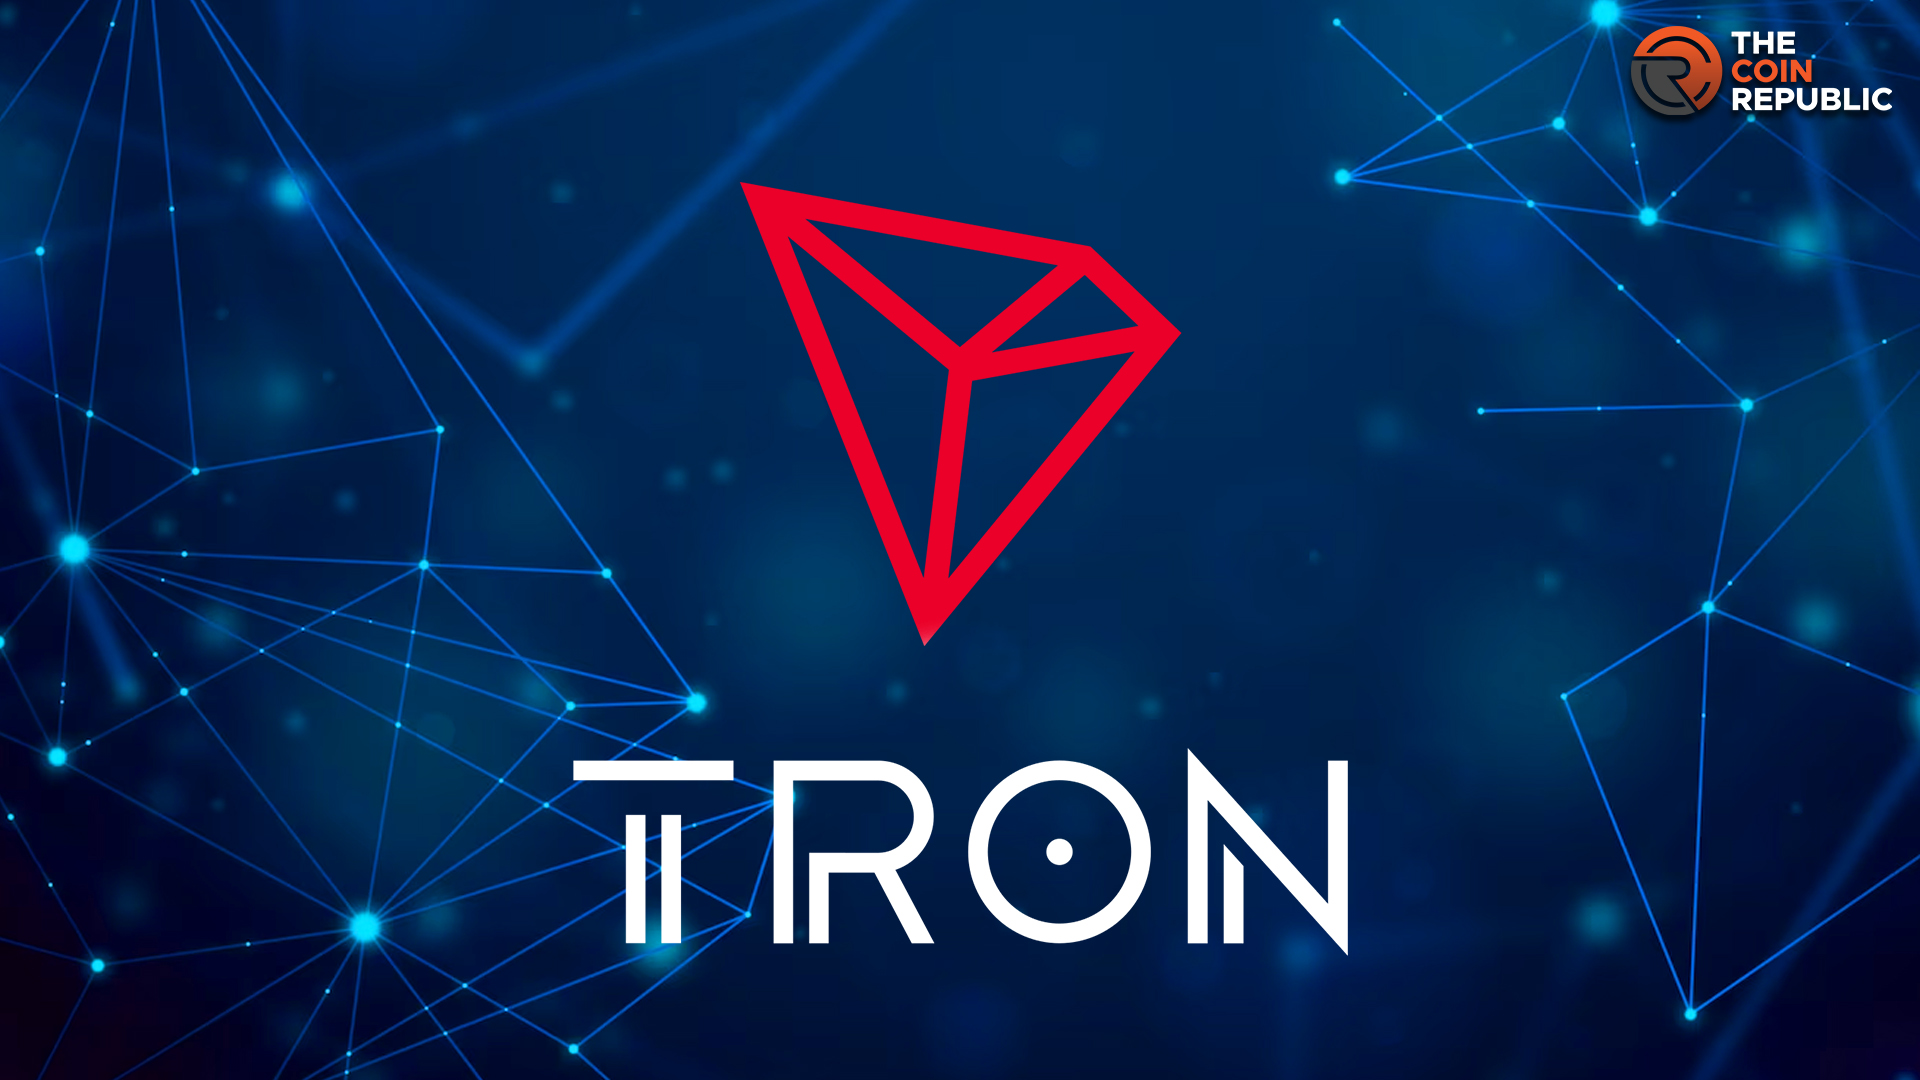 TRON Crypto Price Forecast: Buy, Hold, or Sell TRX Crypto?